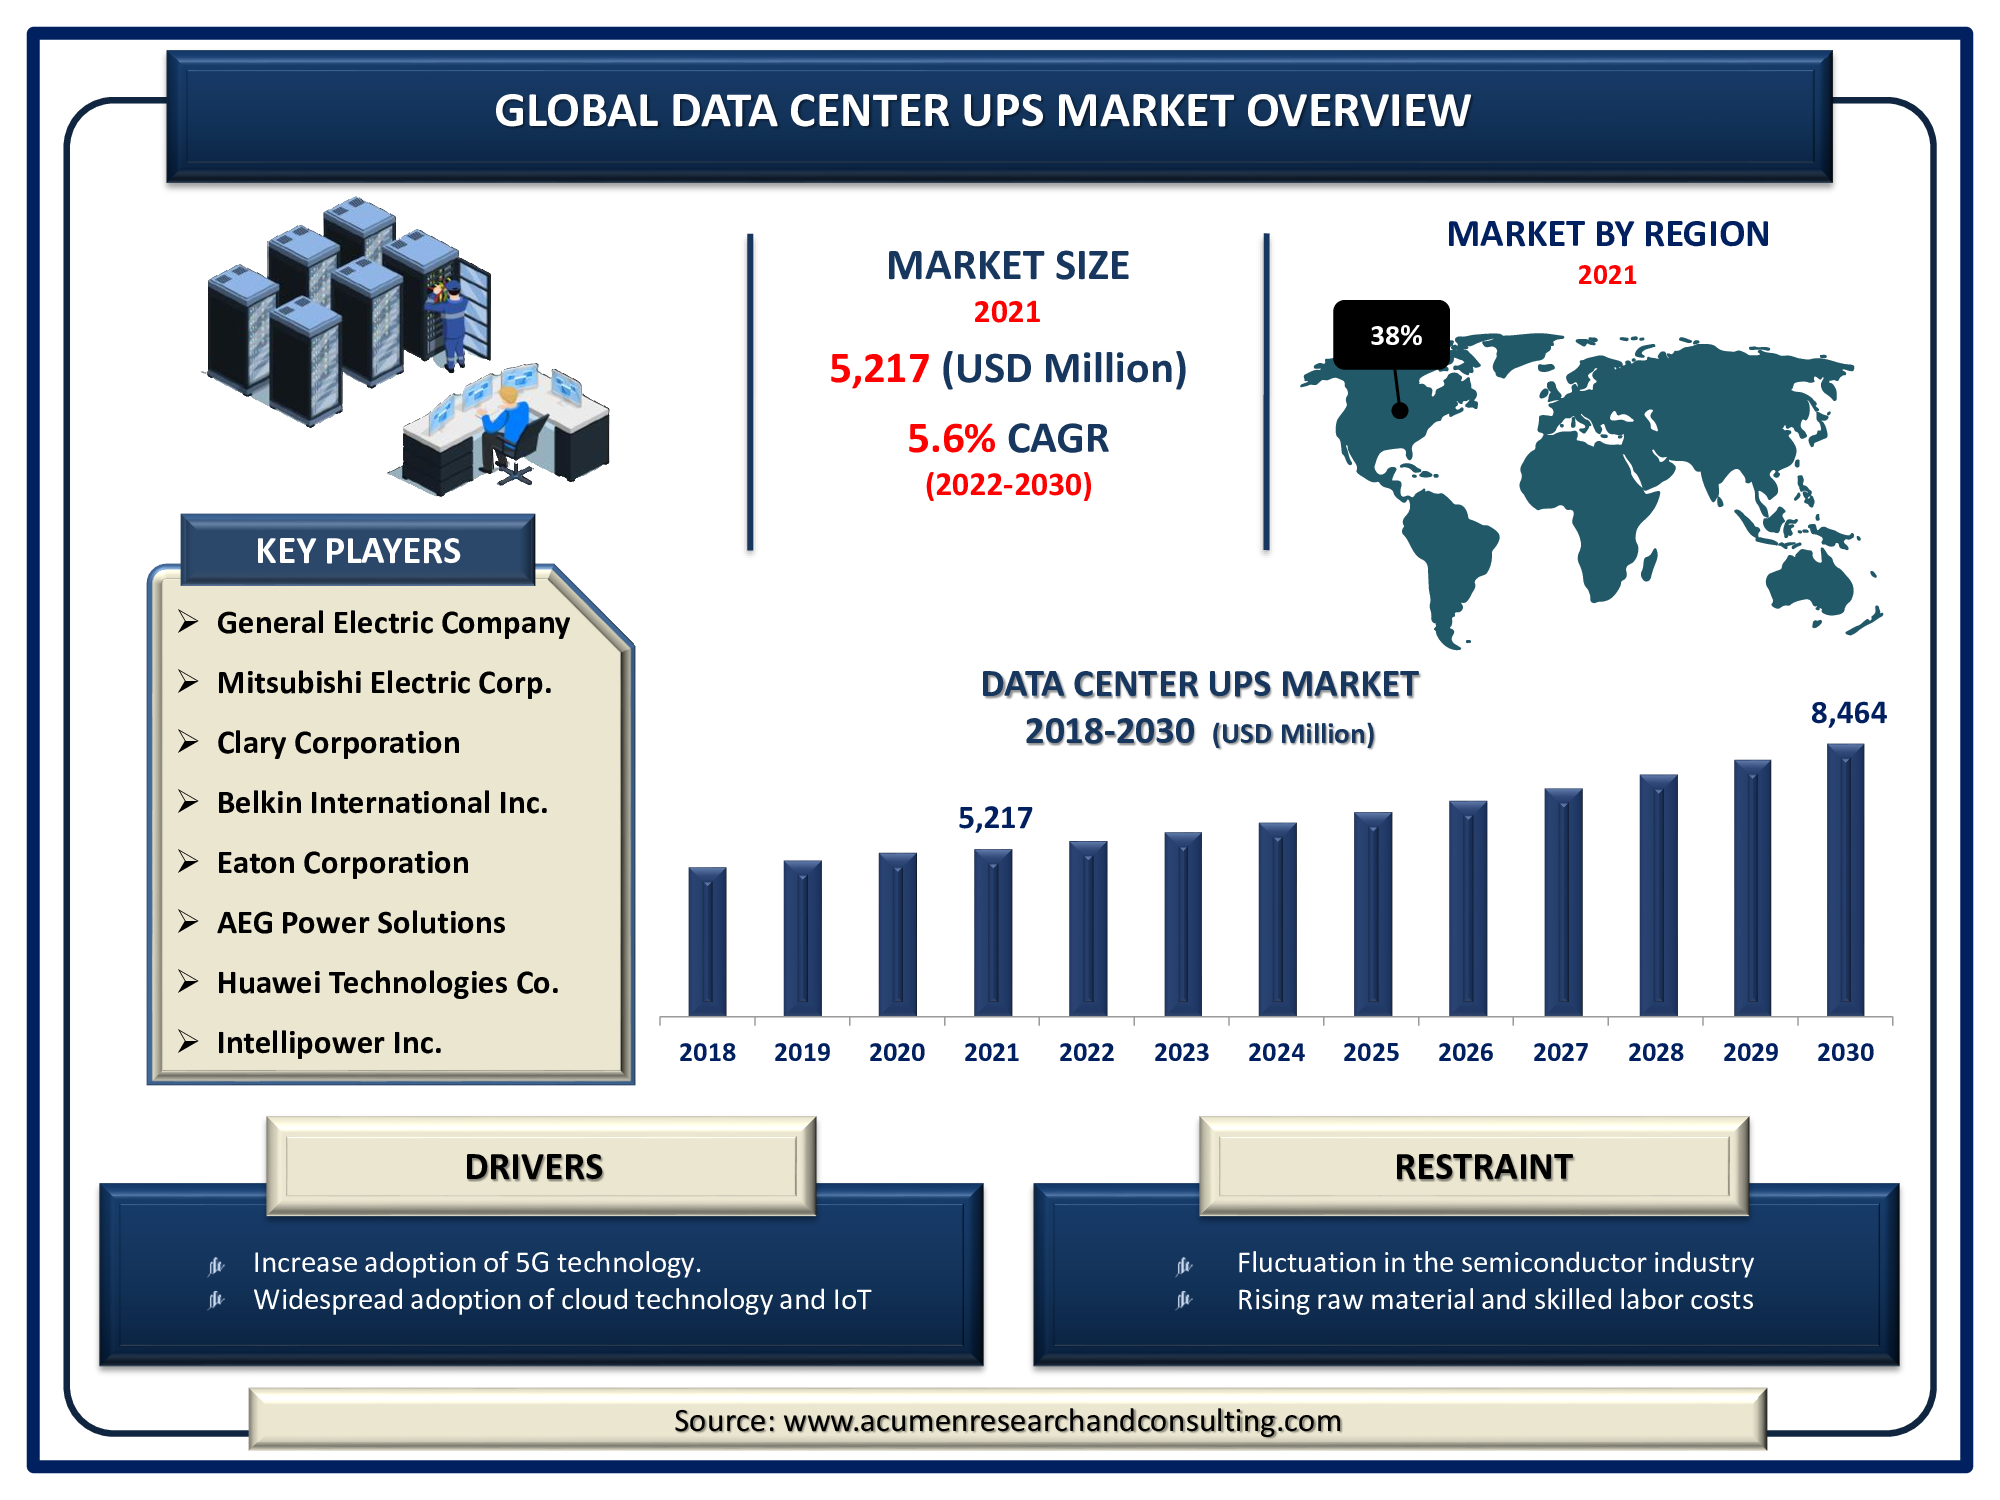 Data Center UPS Market size accounted for USD 5,217 Million in 2021 and is estimated to reach the market value of USD 8,464 Million by 2030, with a significant CAGR of 5.6%